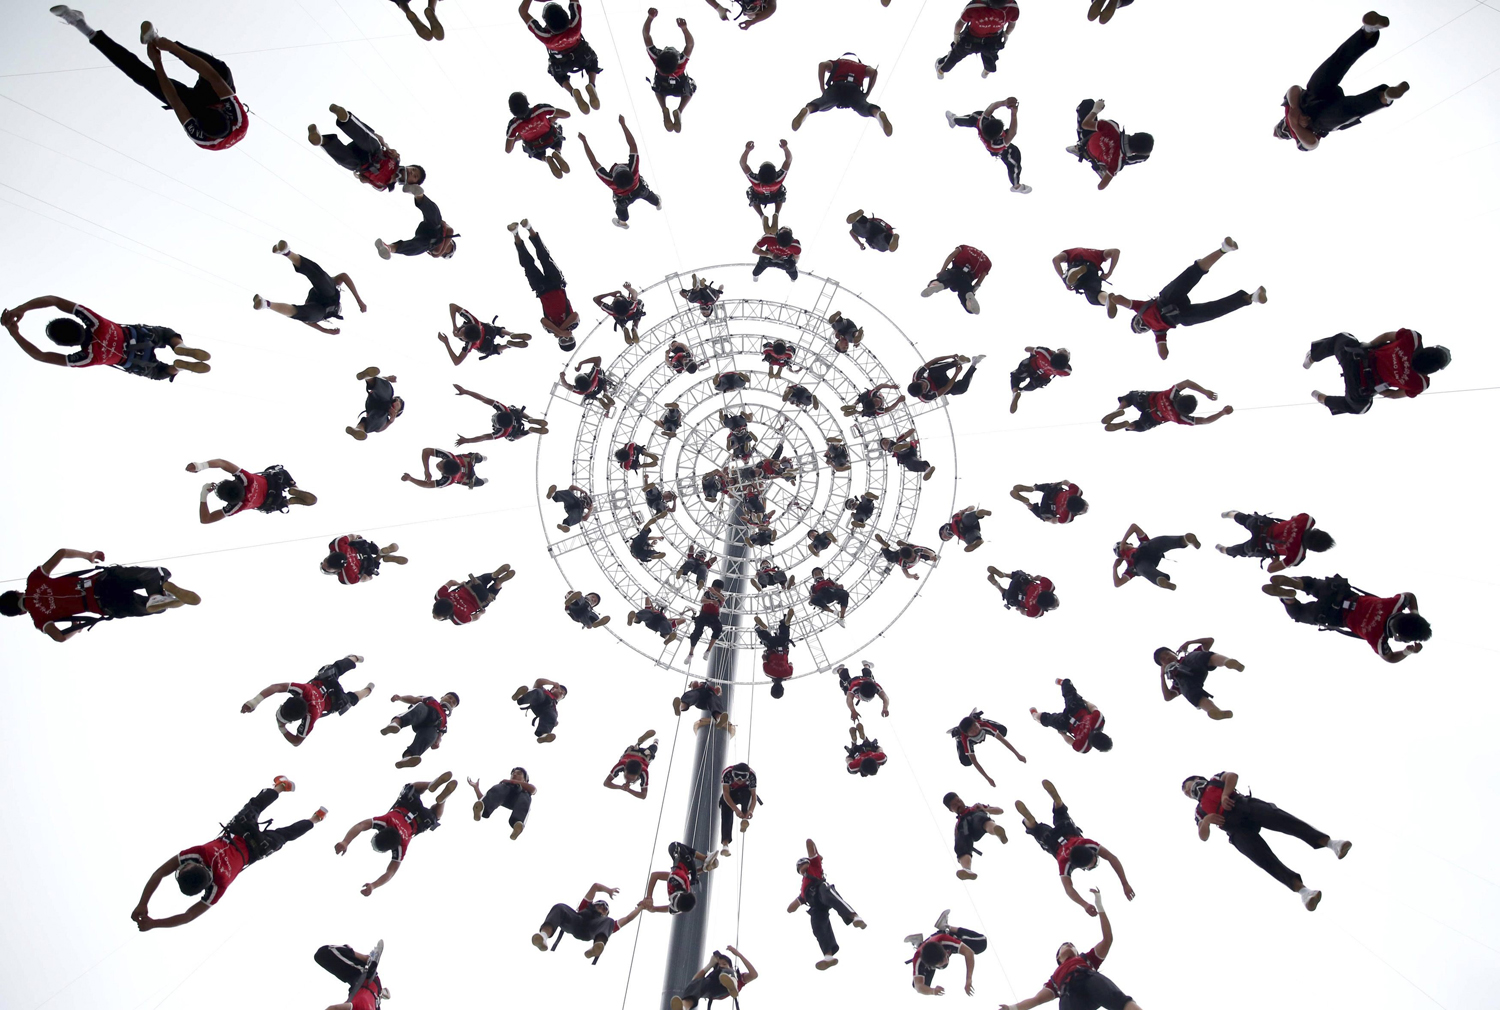 Aug. 9, 2014. Students of Shaolin Tagou Martial Arts School participate in a rehearsal for a stunt performance, which is part of the opening ceremony of the 2014 Nanjing Youth Olympic Games, at a stadium in Nanjing, Jiangsu province, China.